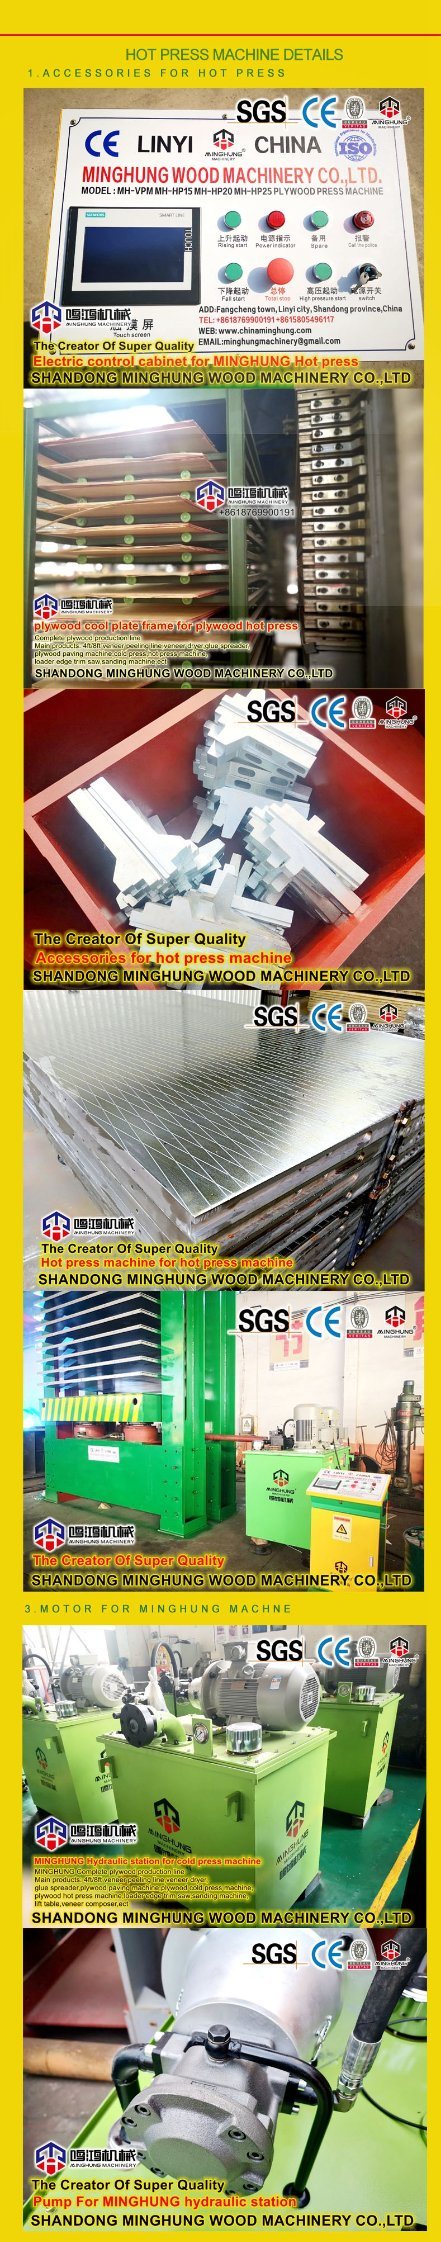 China Plywood Hot Press for Furniture Construction Plywood